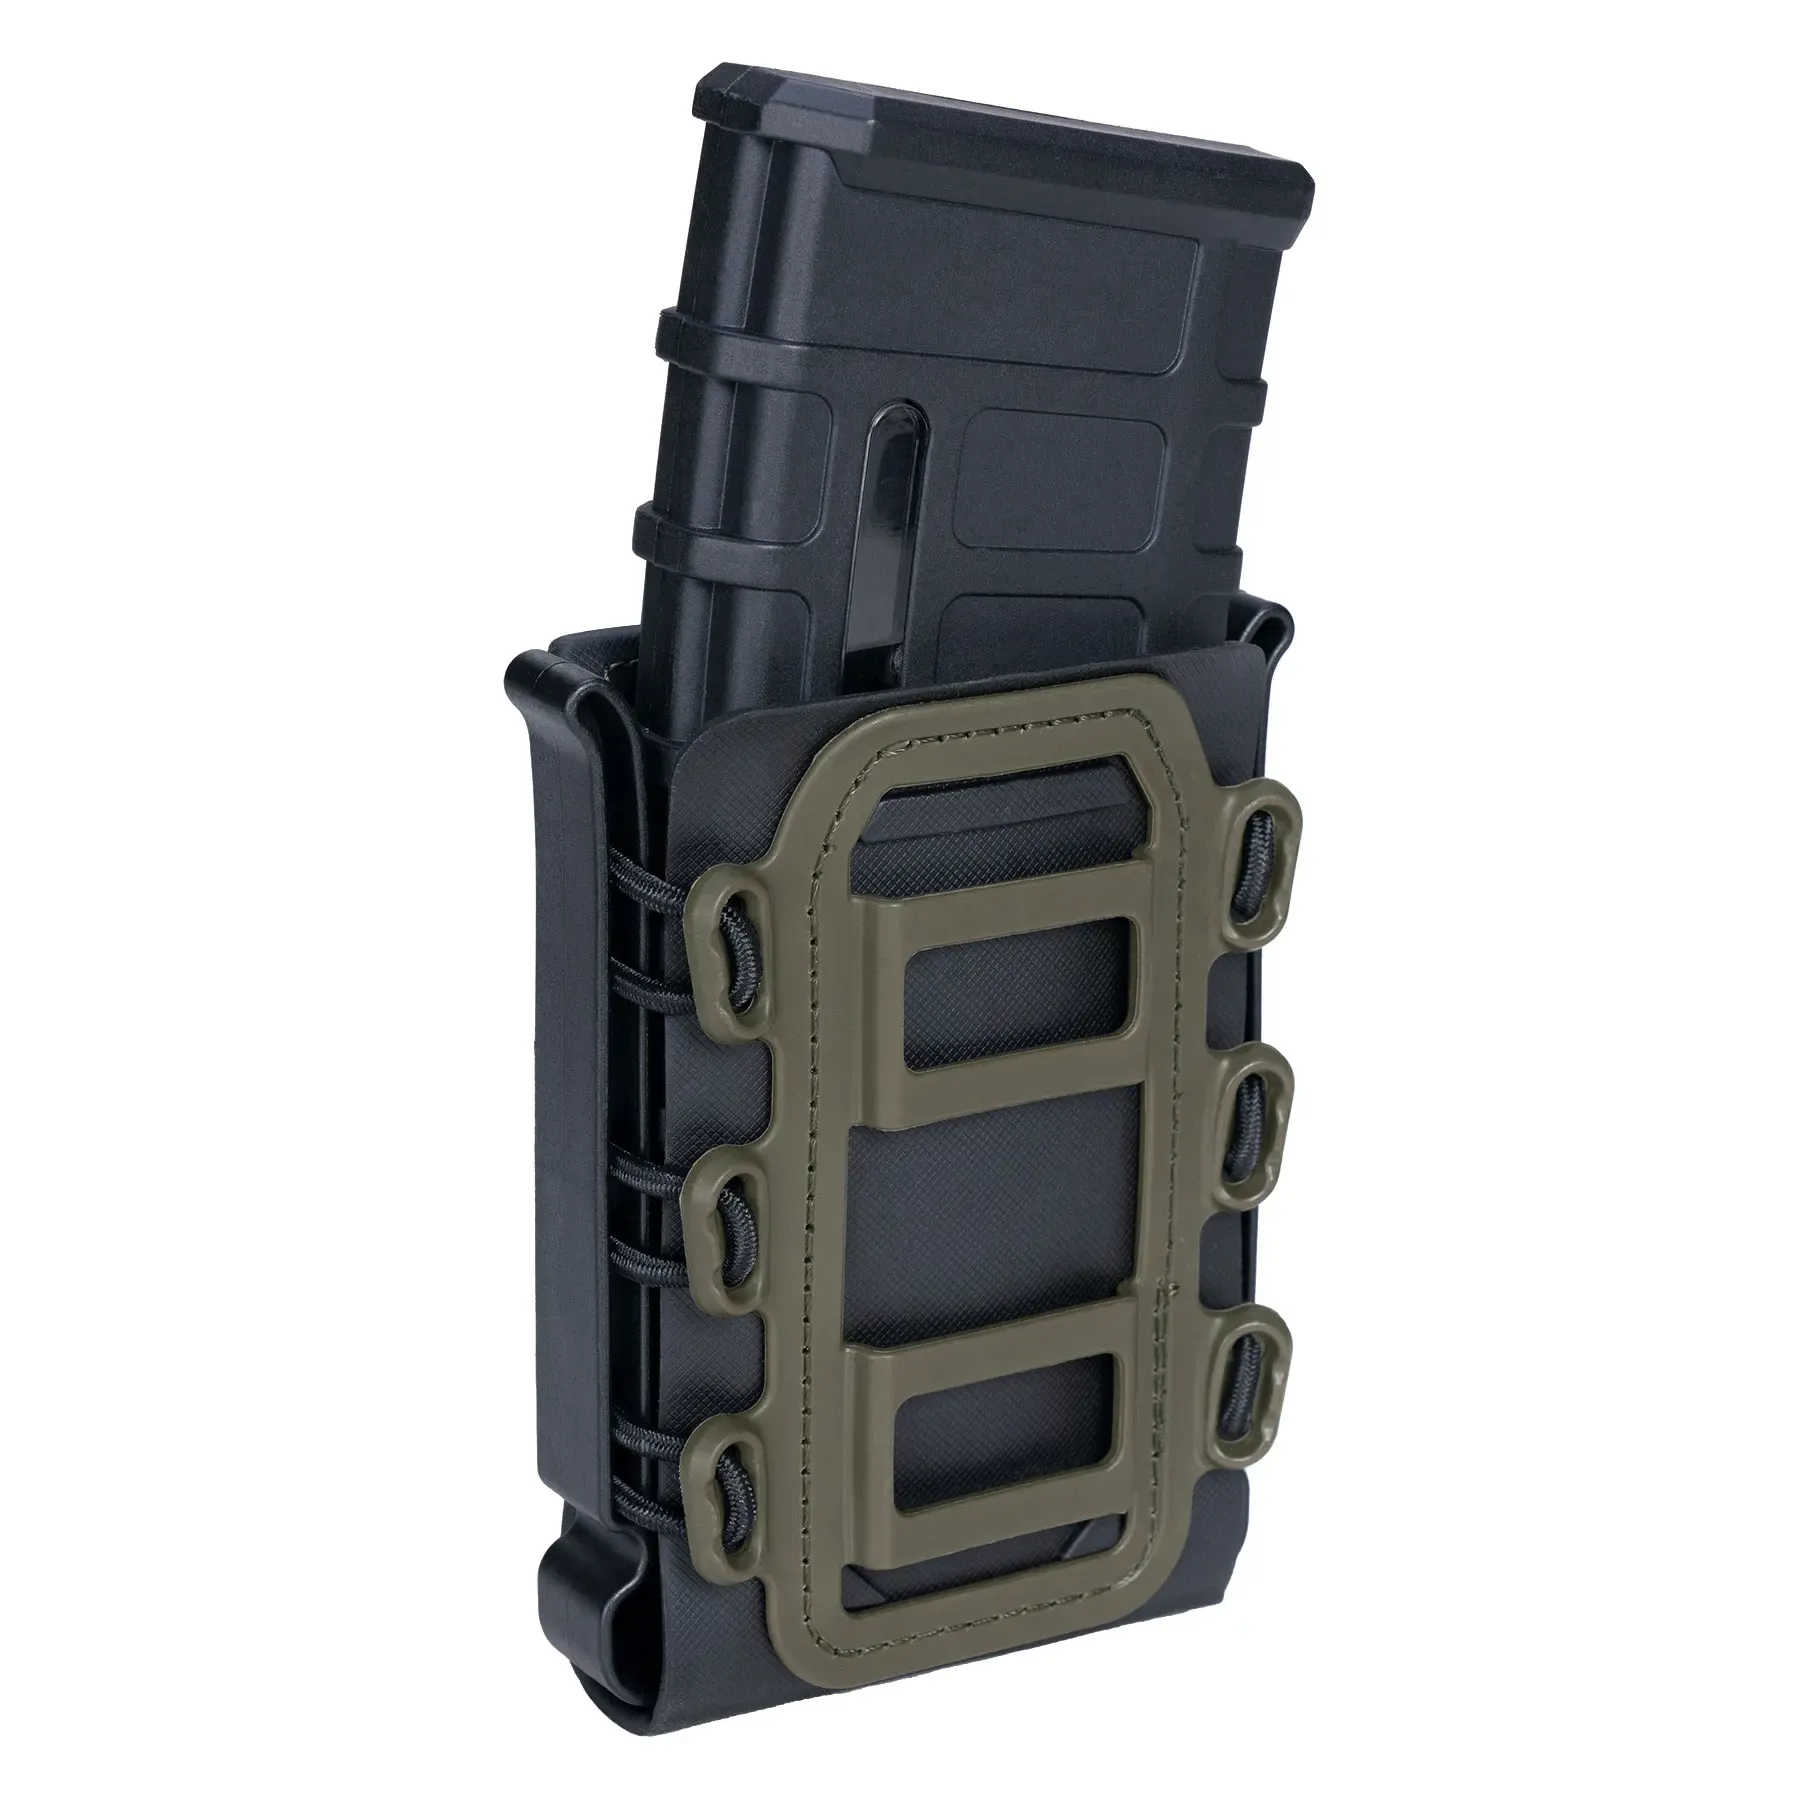 Holsters Idogear Soft Shell Rifle Mag Carrier Tactical Magazine Pouches 5.56mm 7.62mm G Code Military Airsoft Holster Fastmag Igbg3516